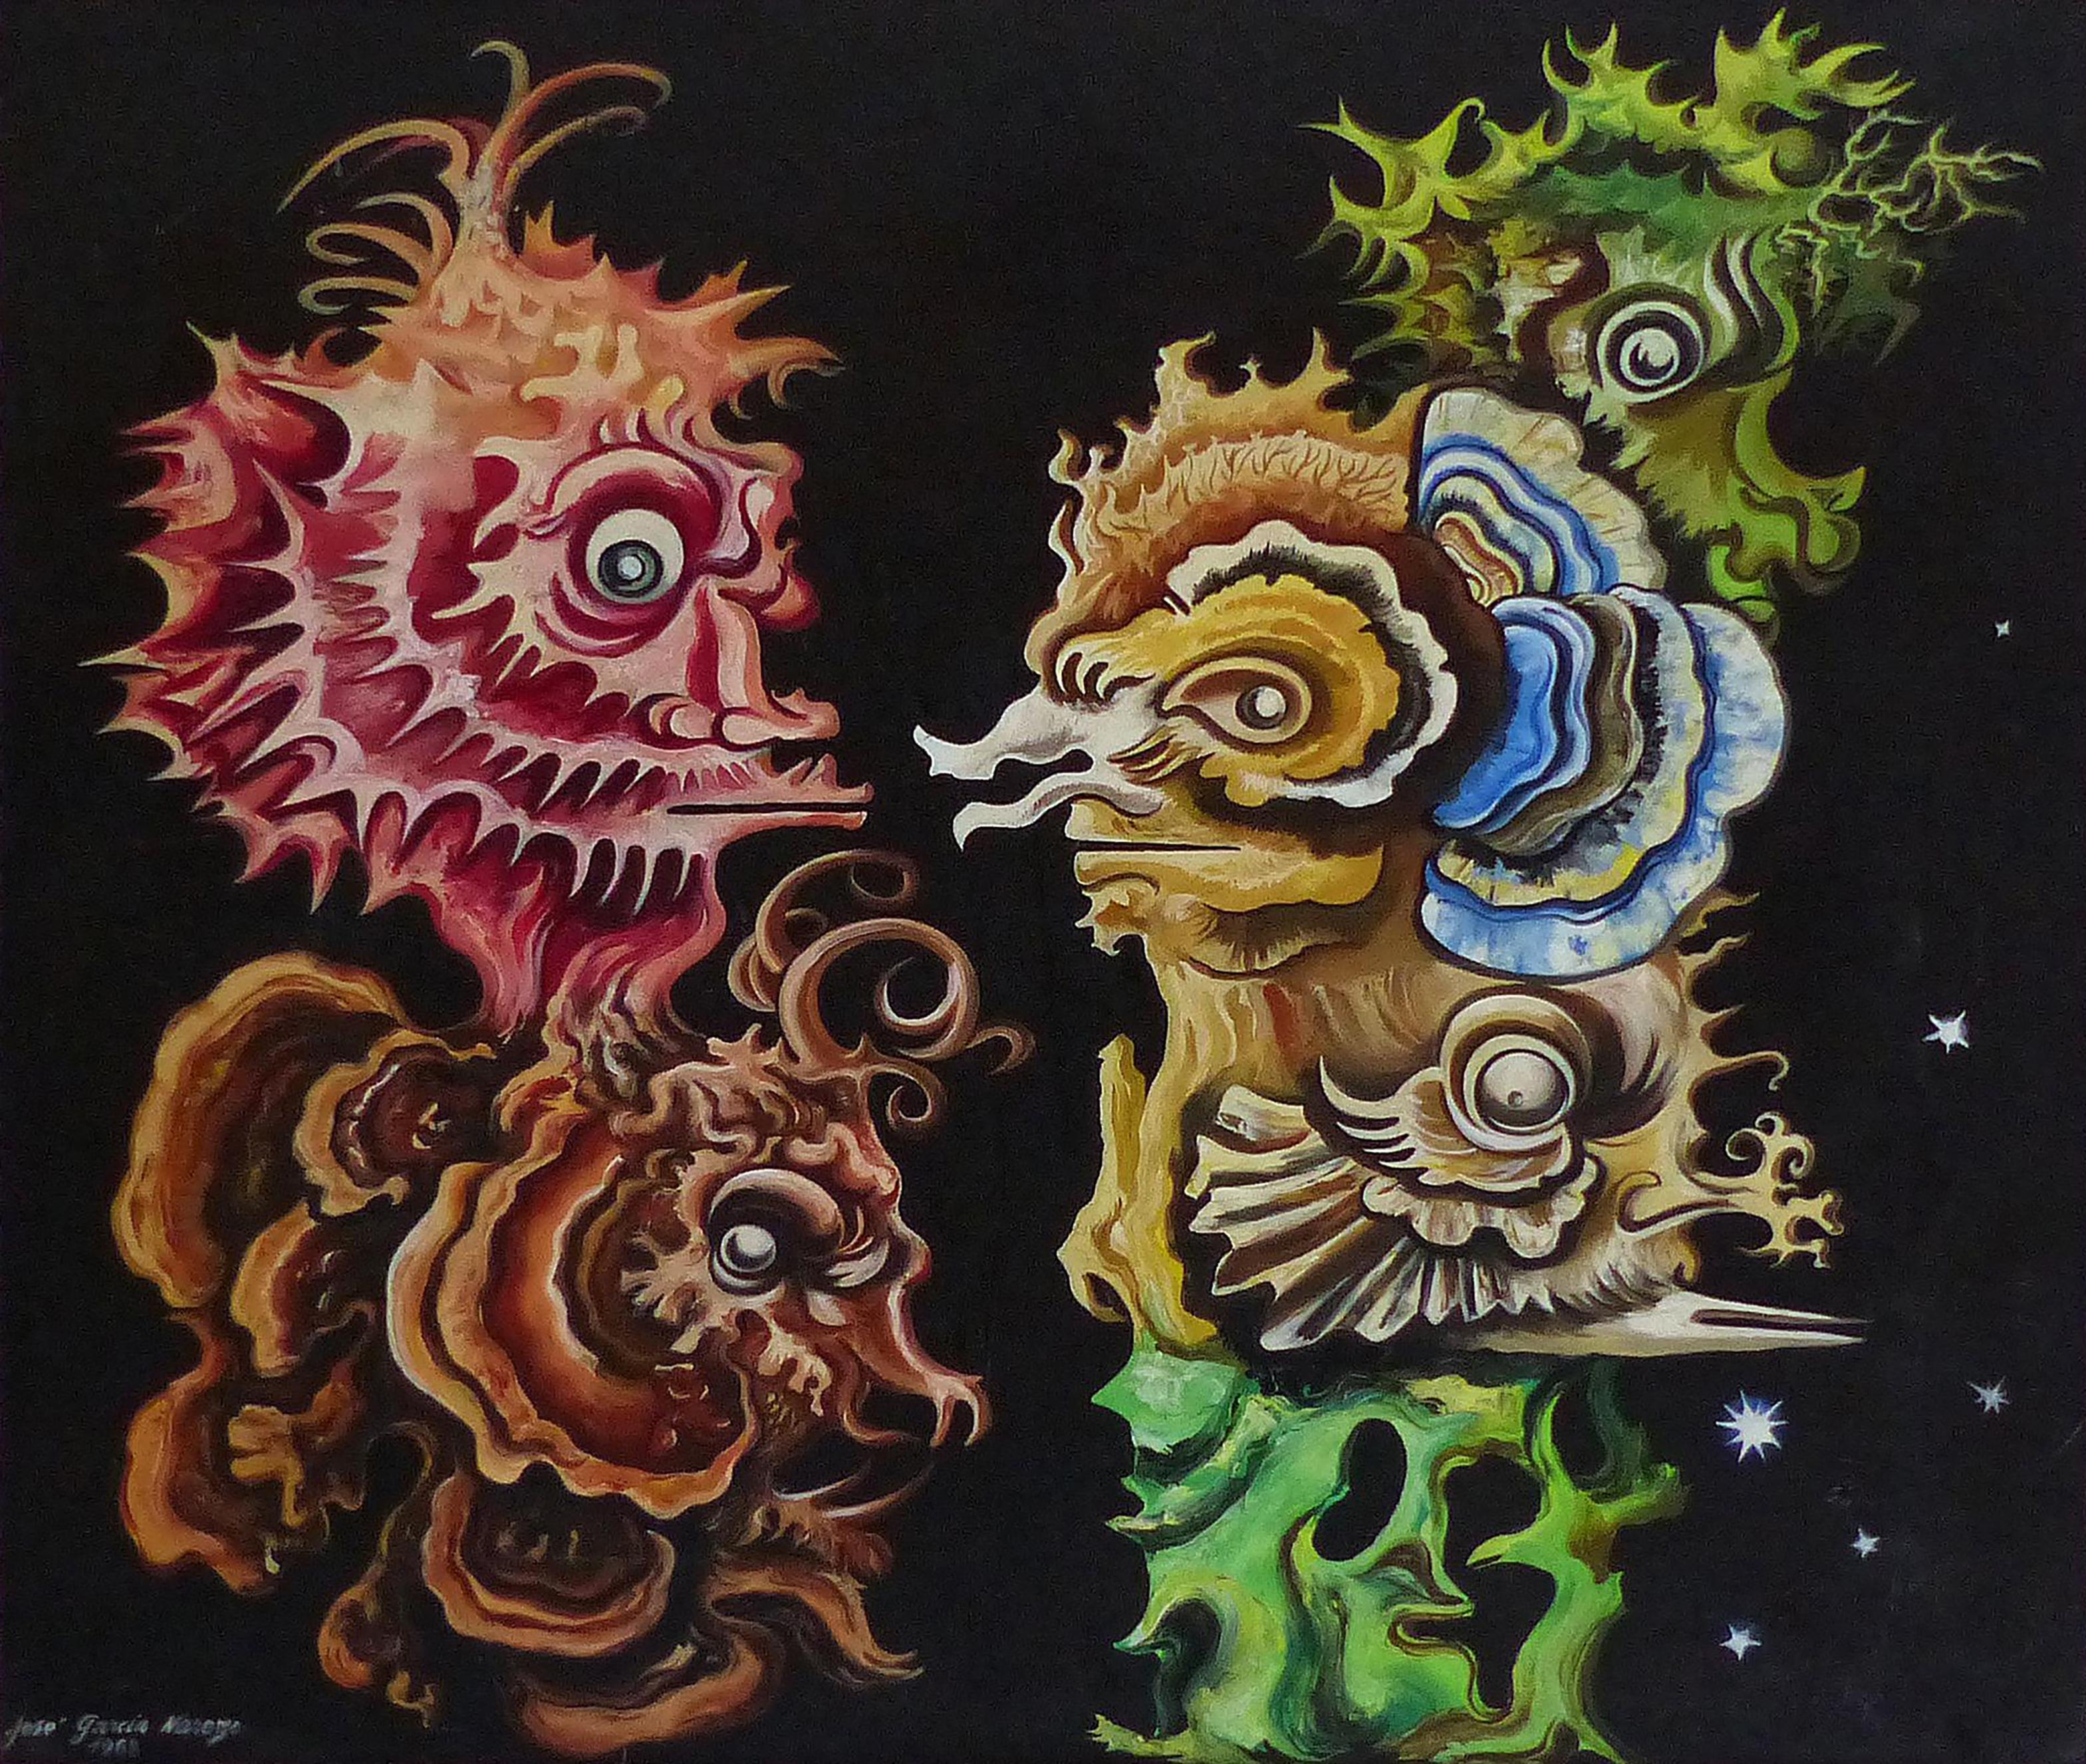 


José García Narezo Seahorses Oil Painting, Mexico

Offered for sale is an oil painting on Masonite board titled 